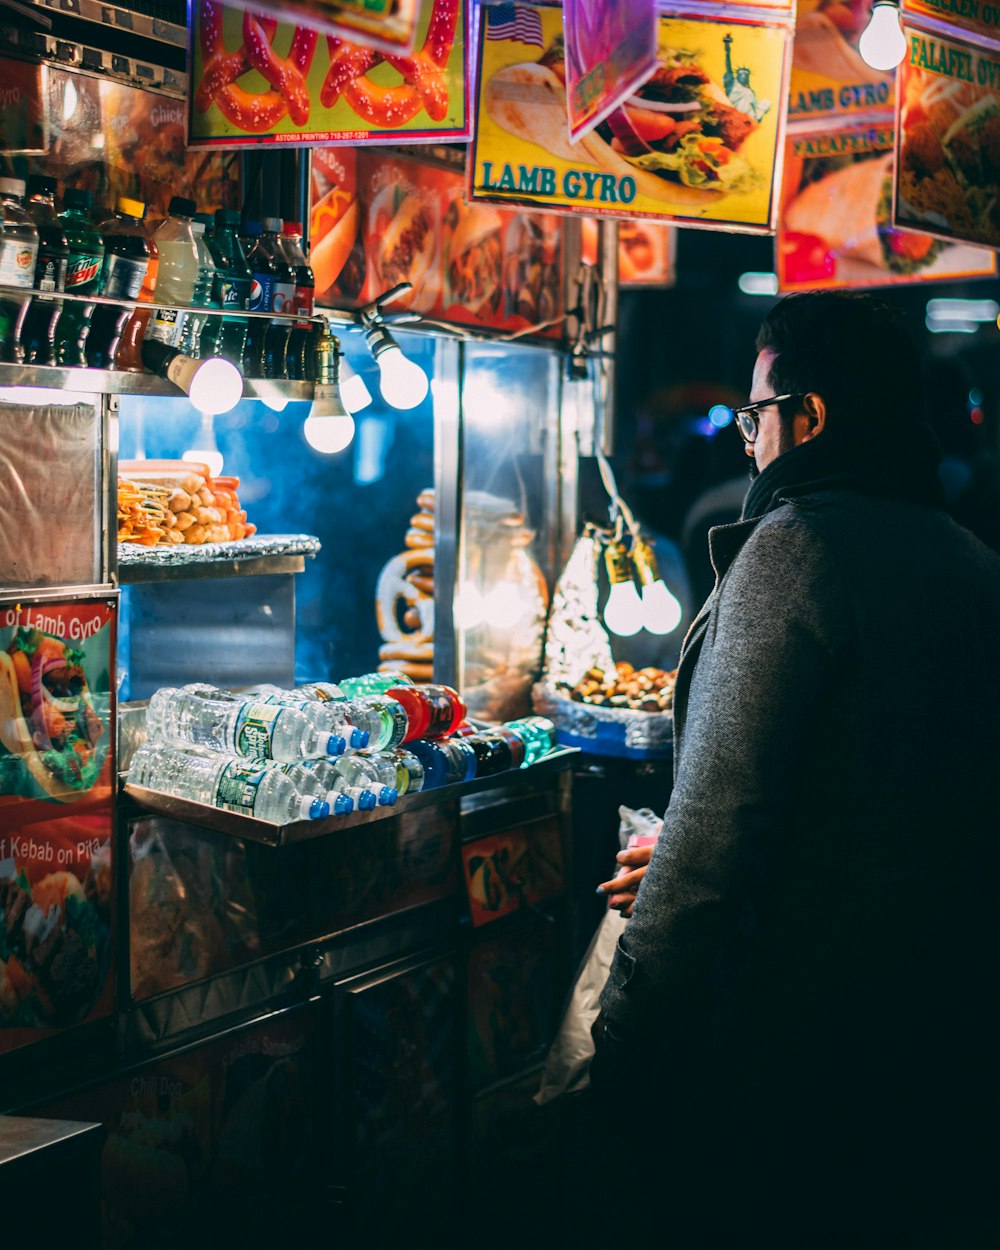 man with coat standing in front of food cart during nighttime